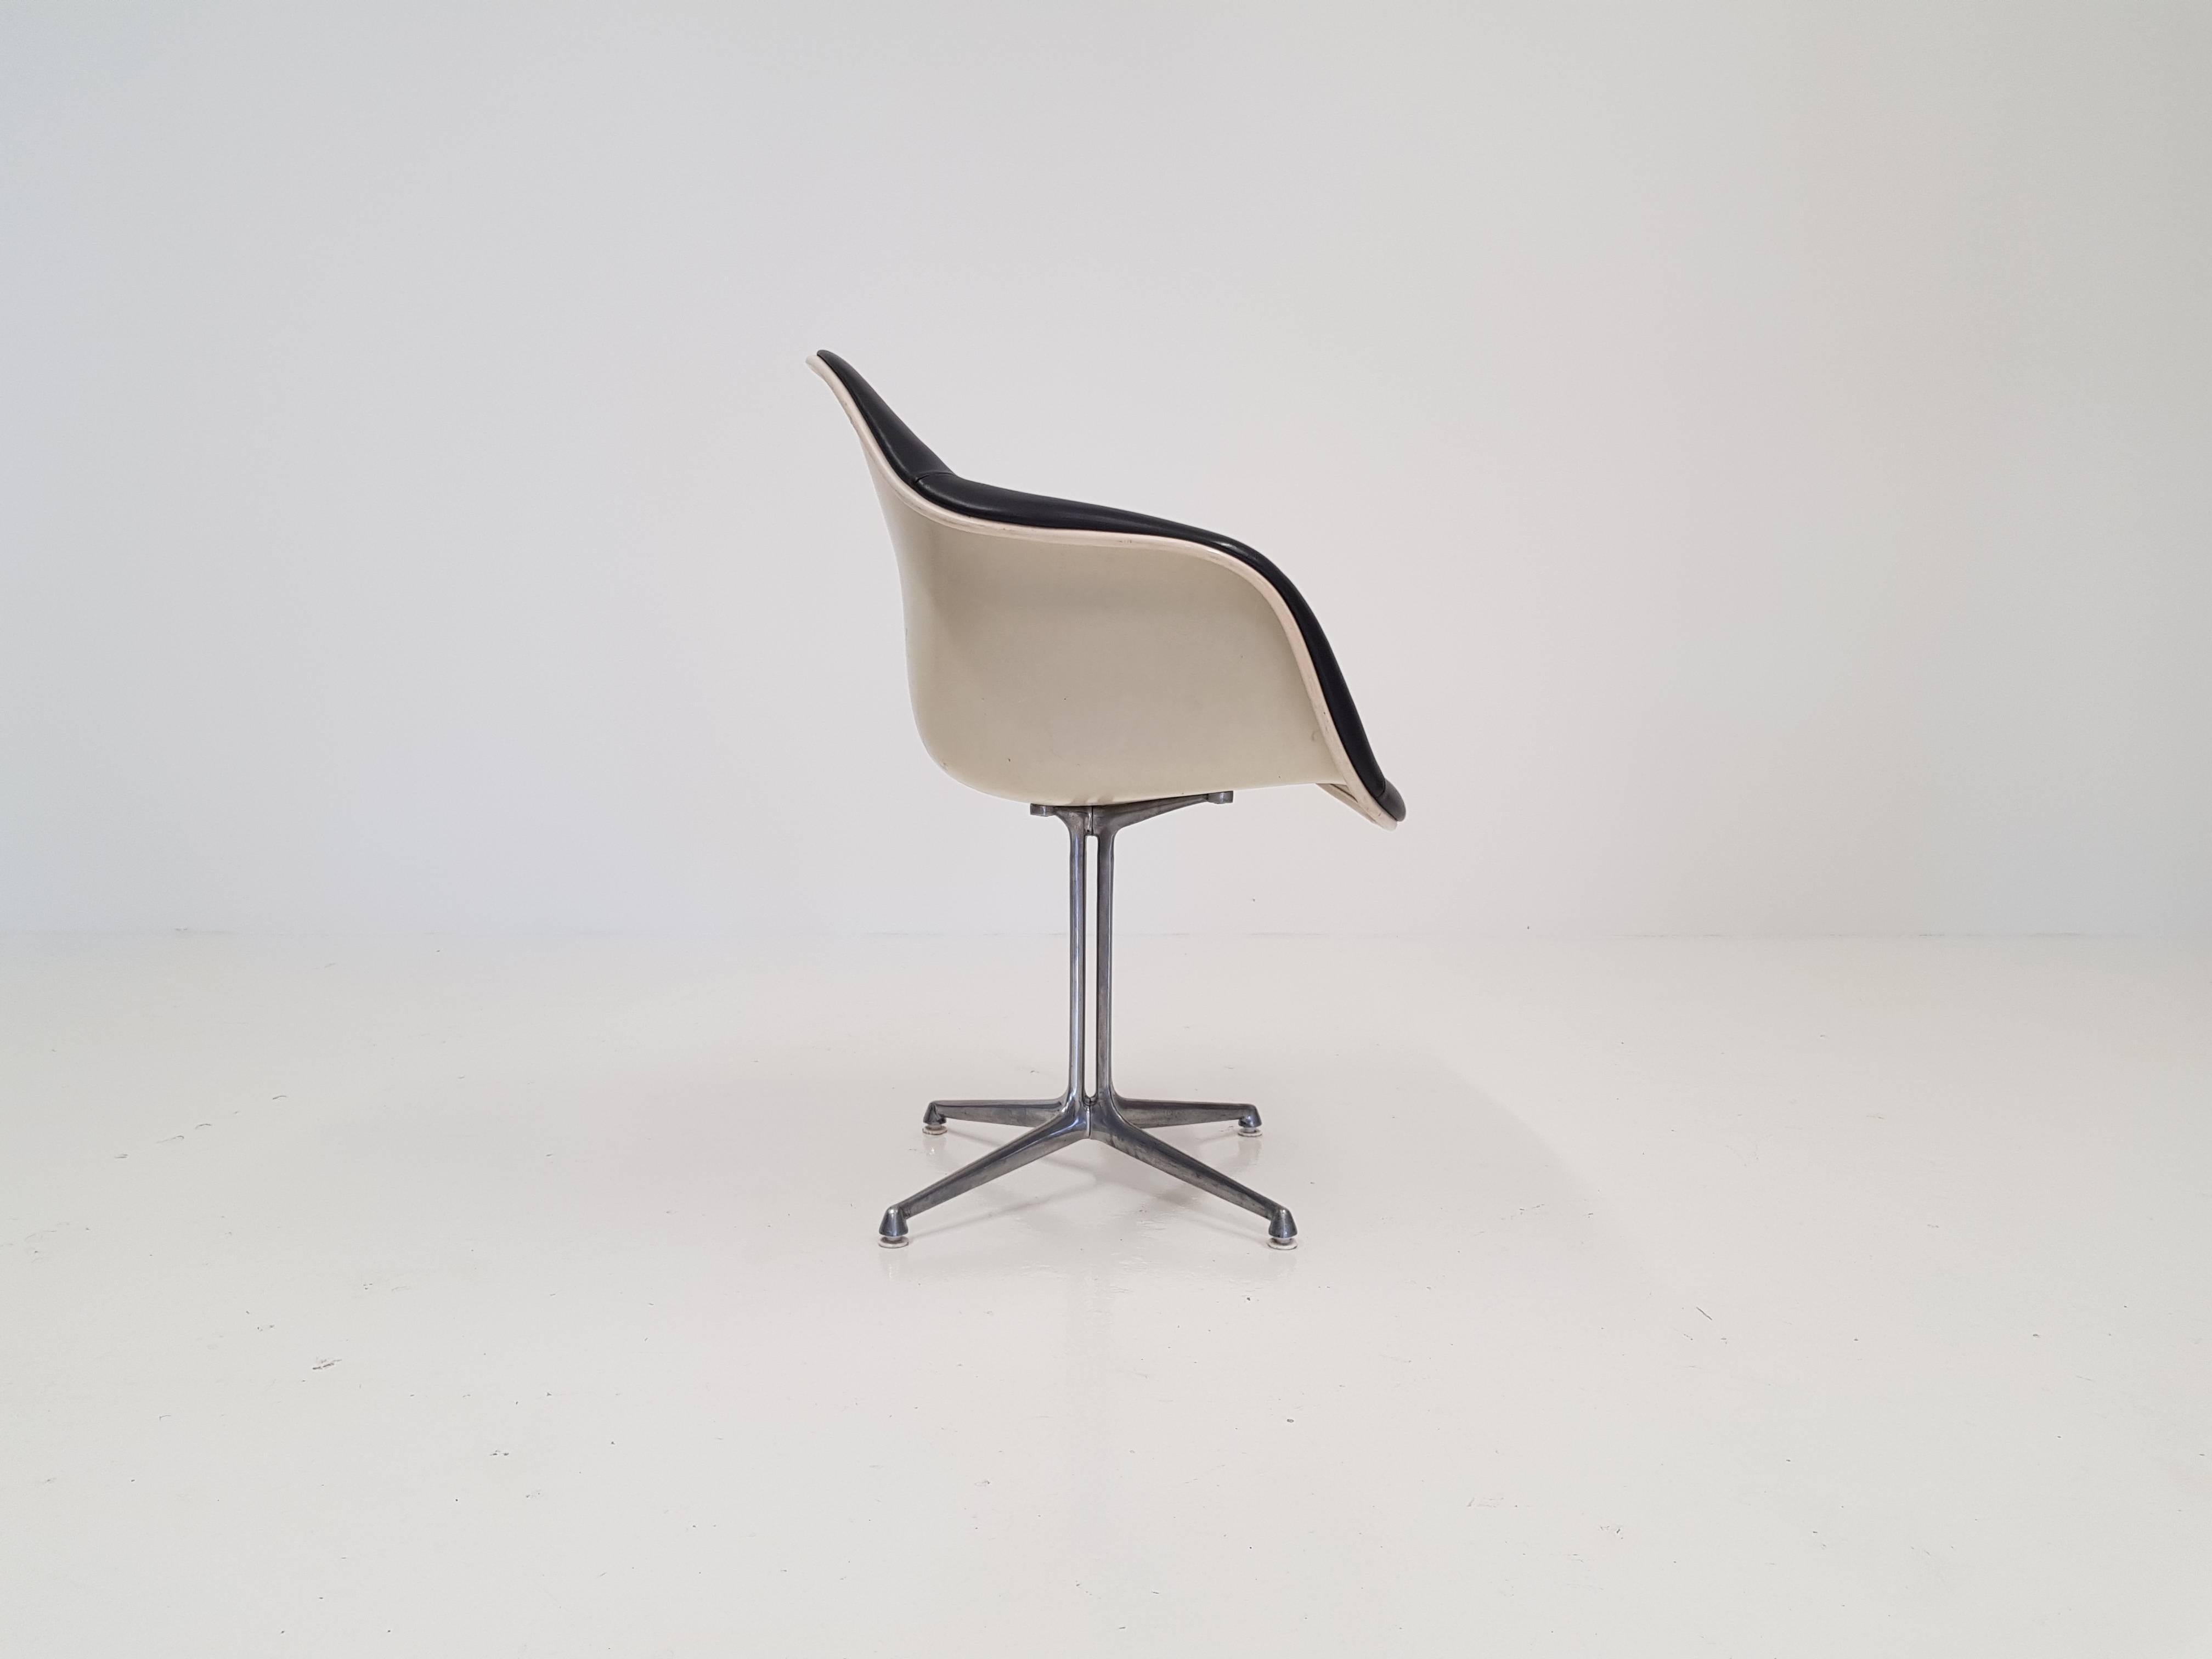 20th Century Charles and Ray Eames 'La Fonda' Chair for Herman Miller